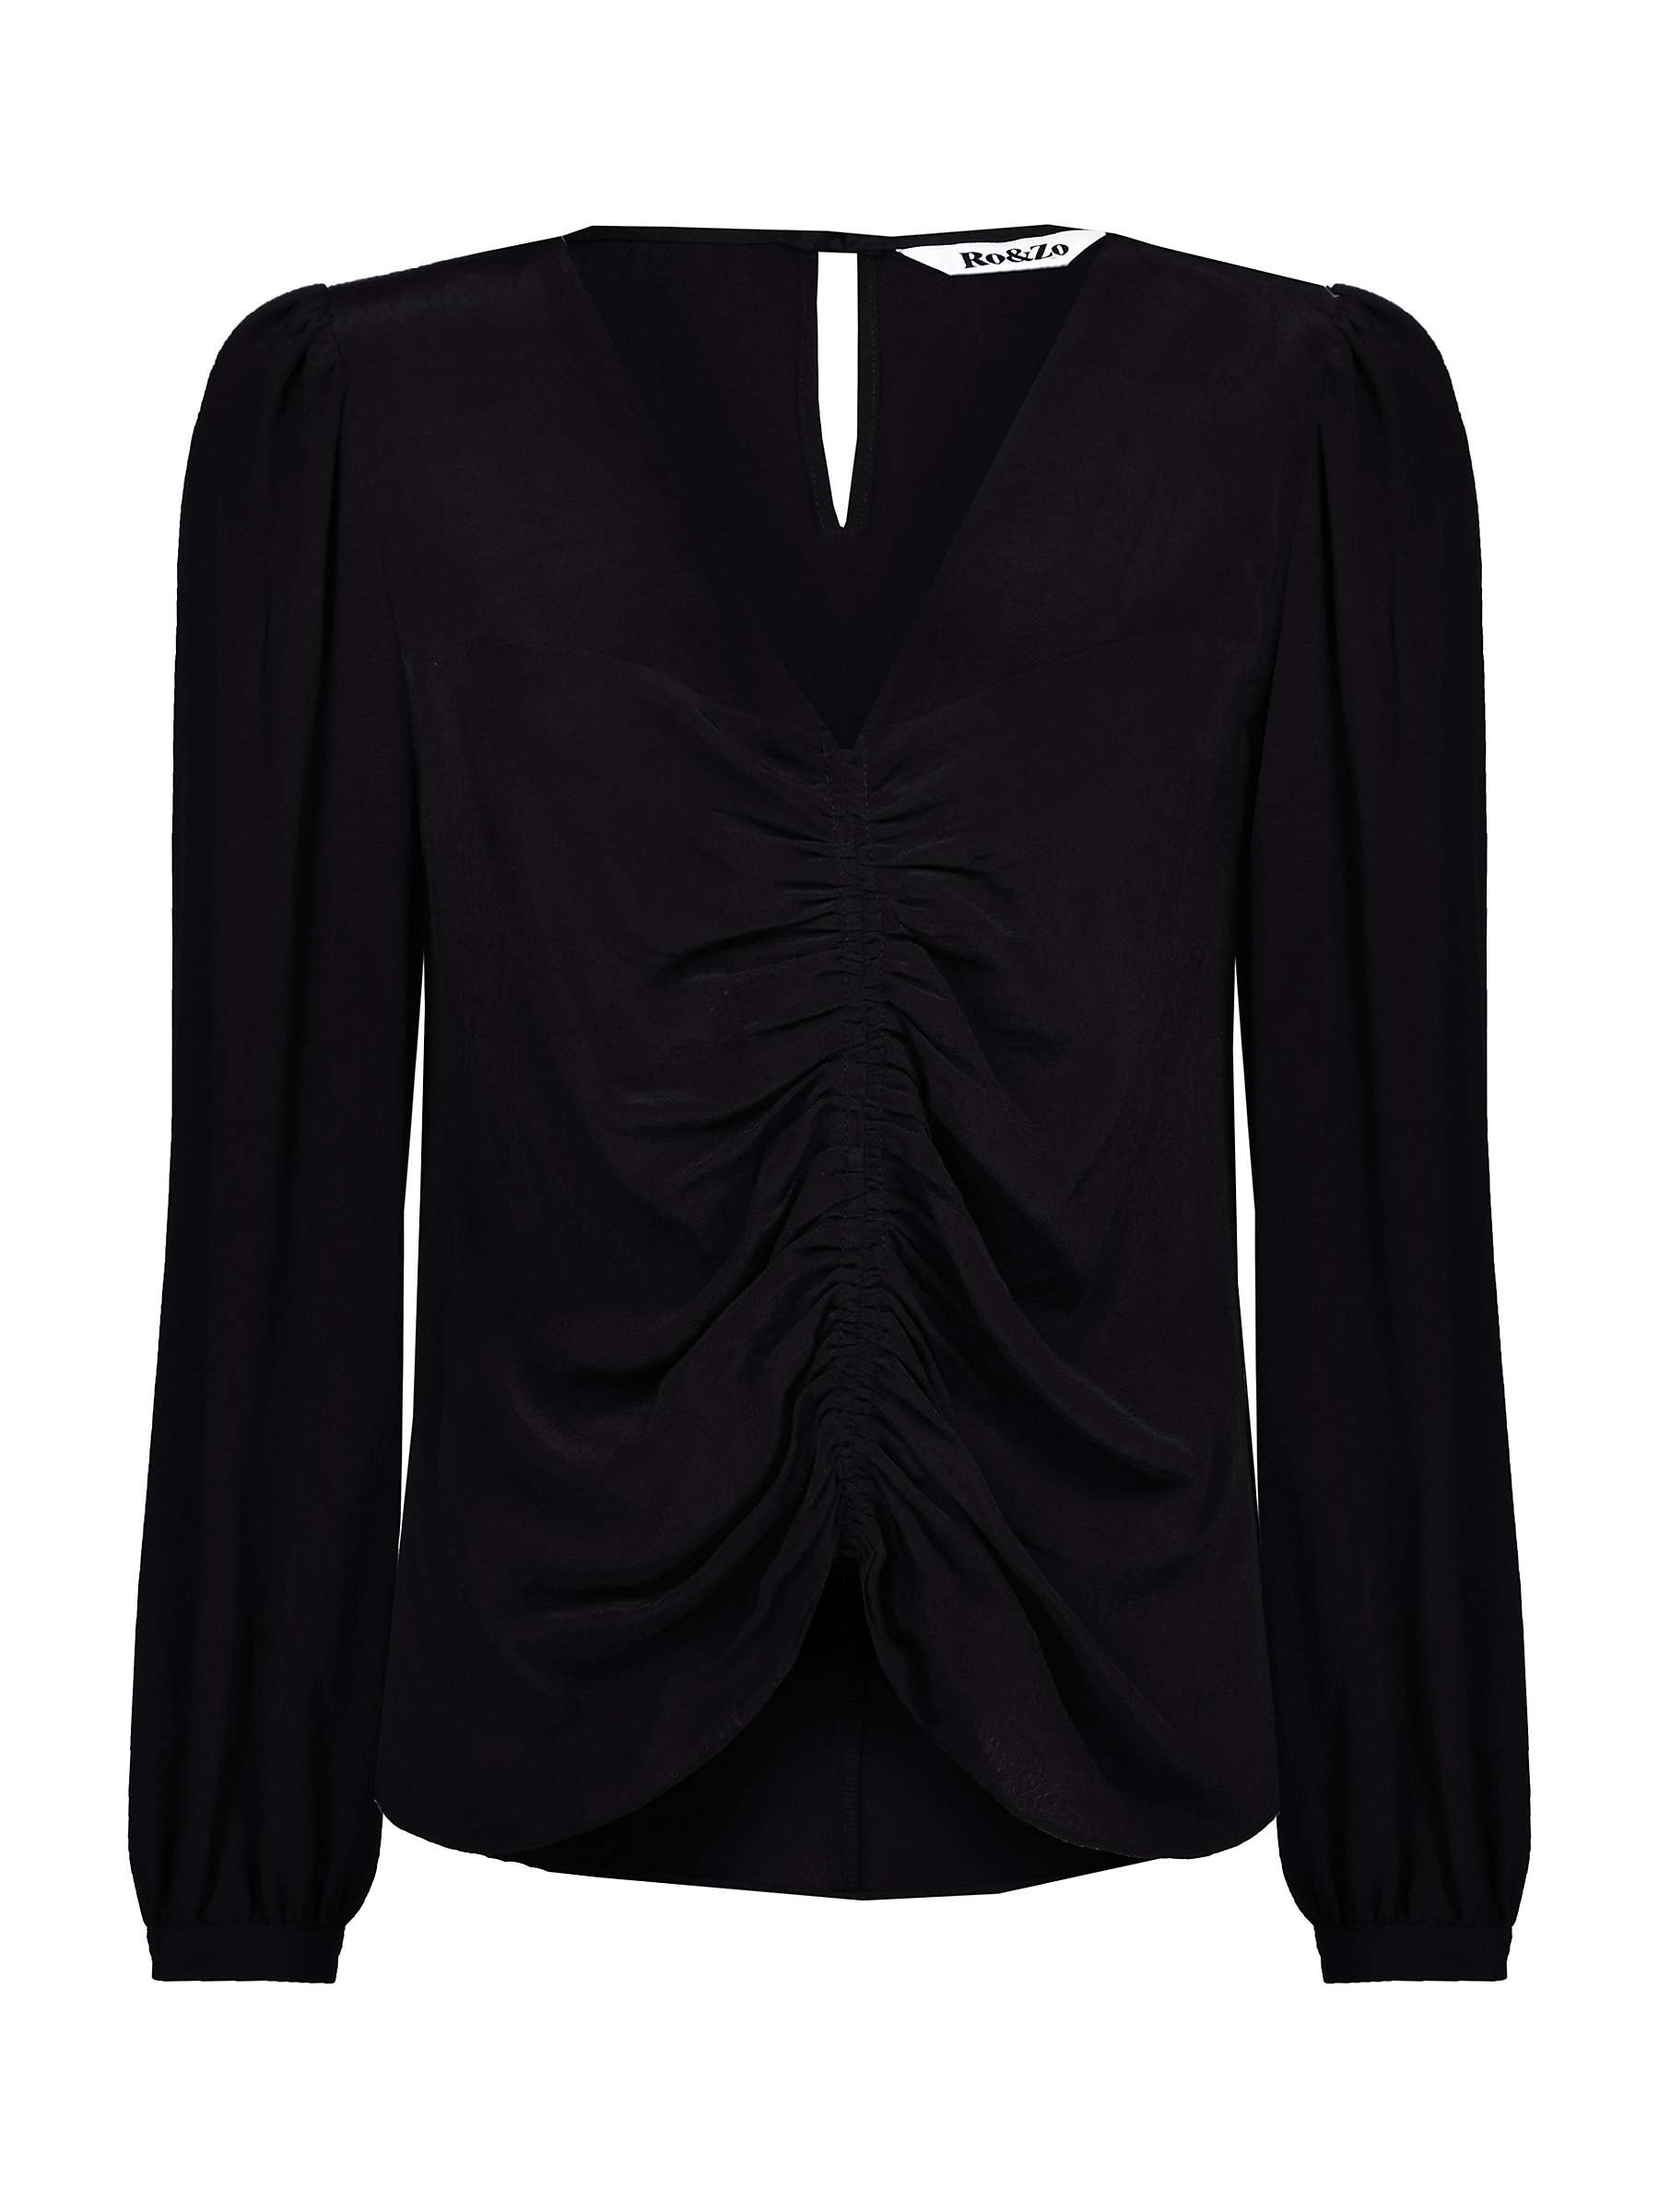 Ro&Zo Ruched Front Top, Black at John Lewis & Partners